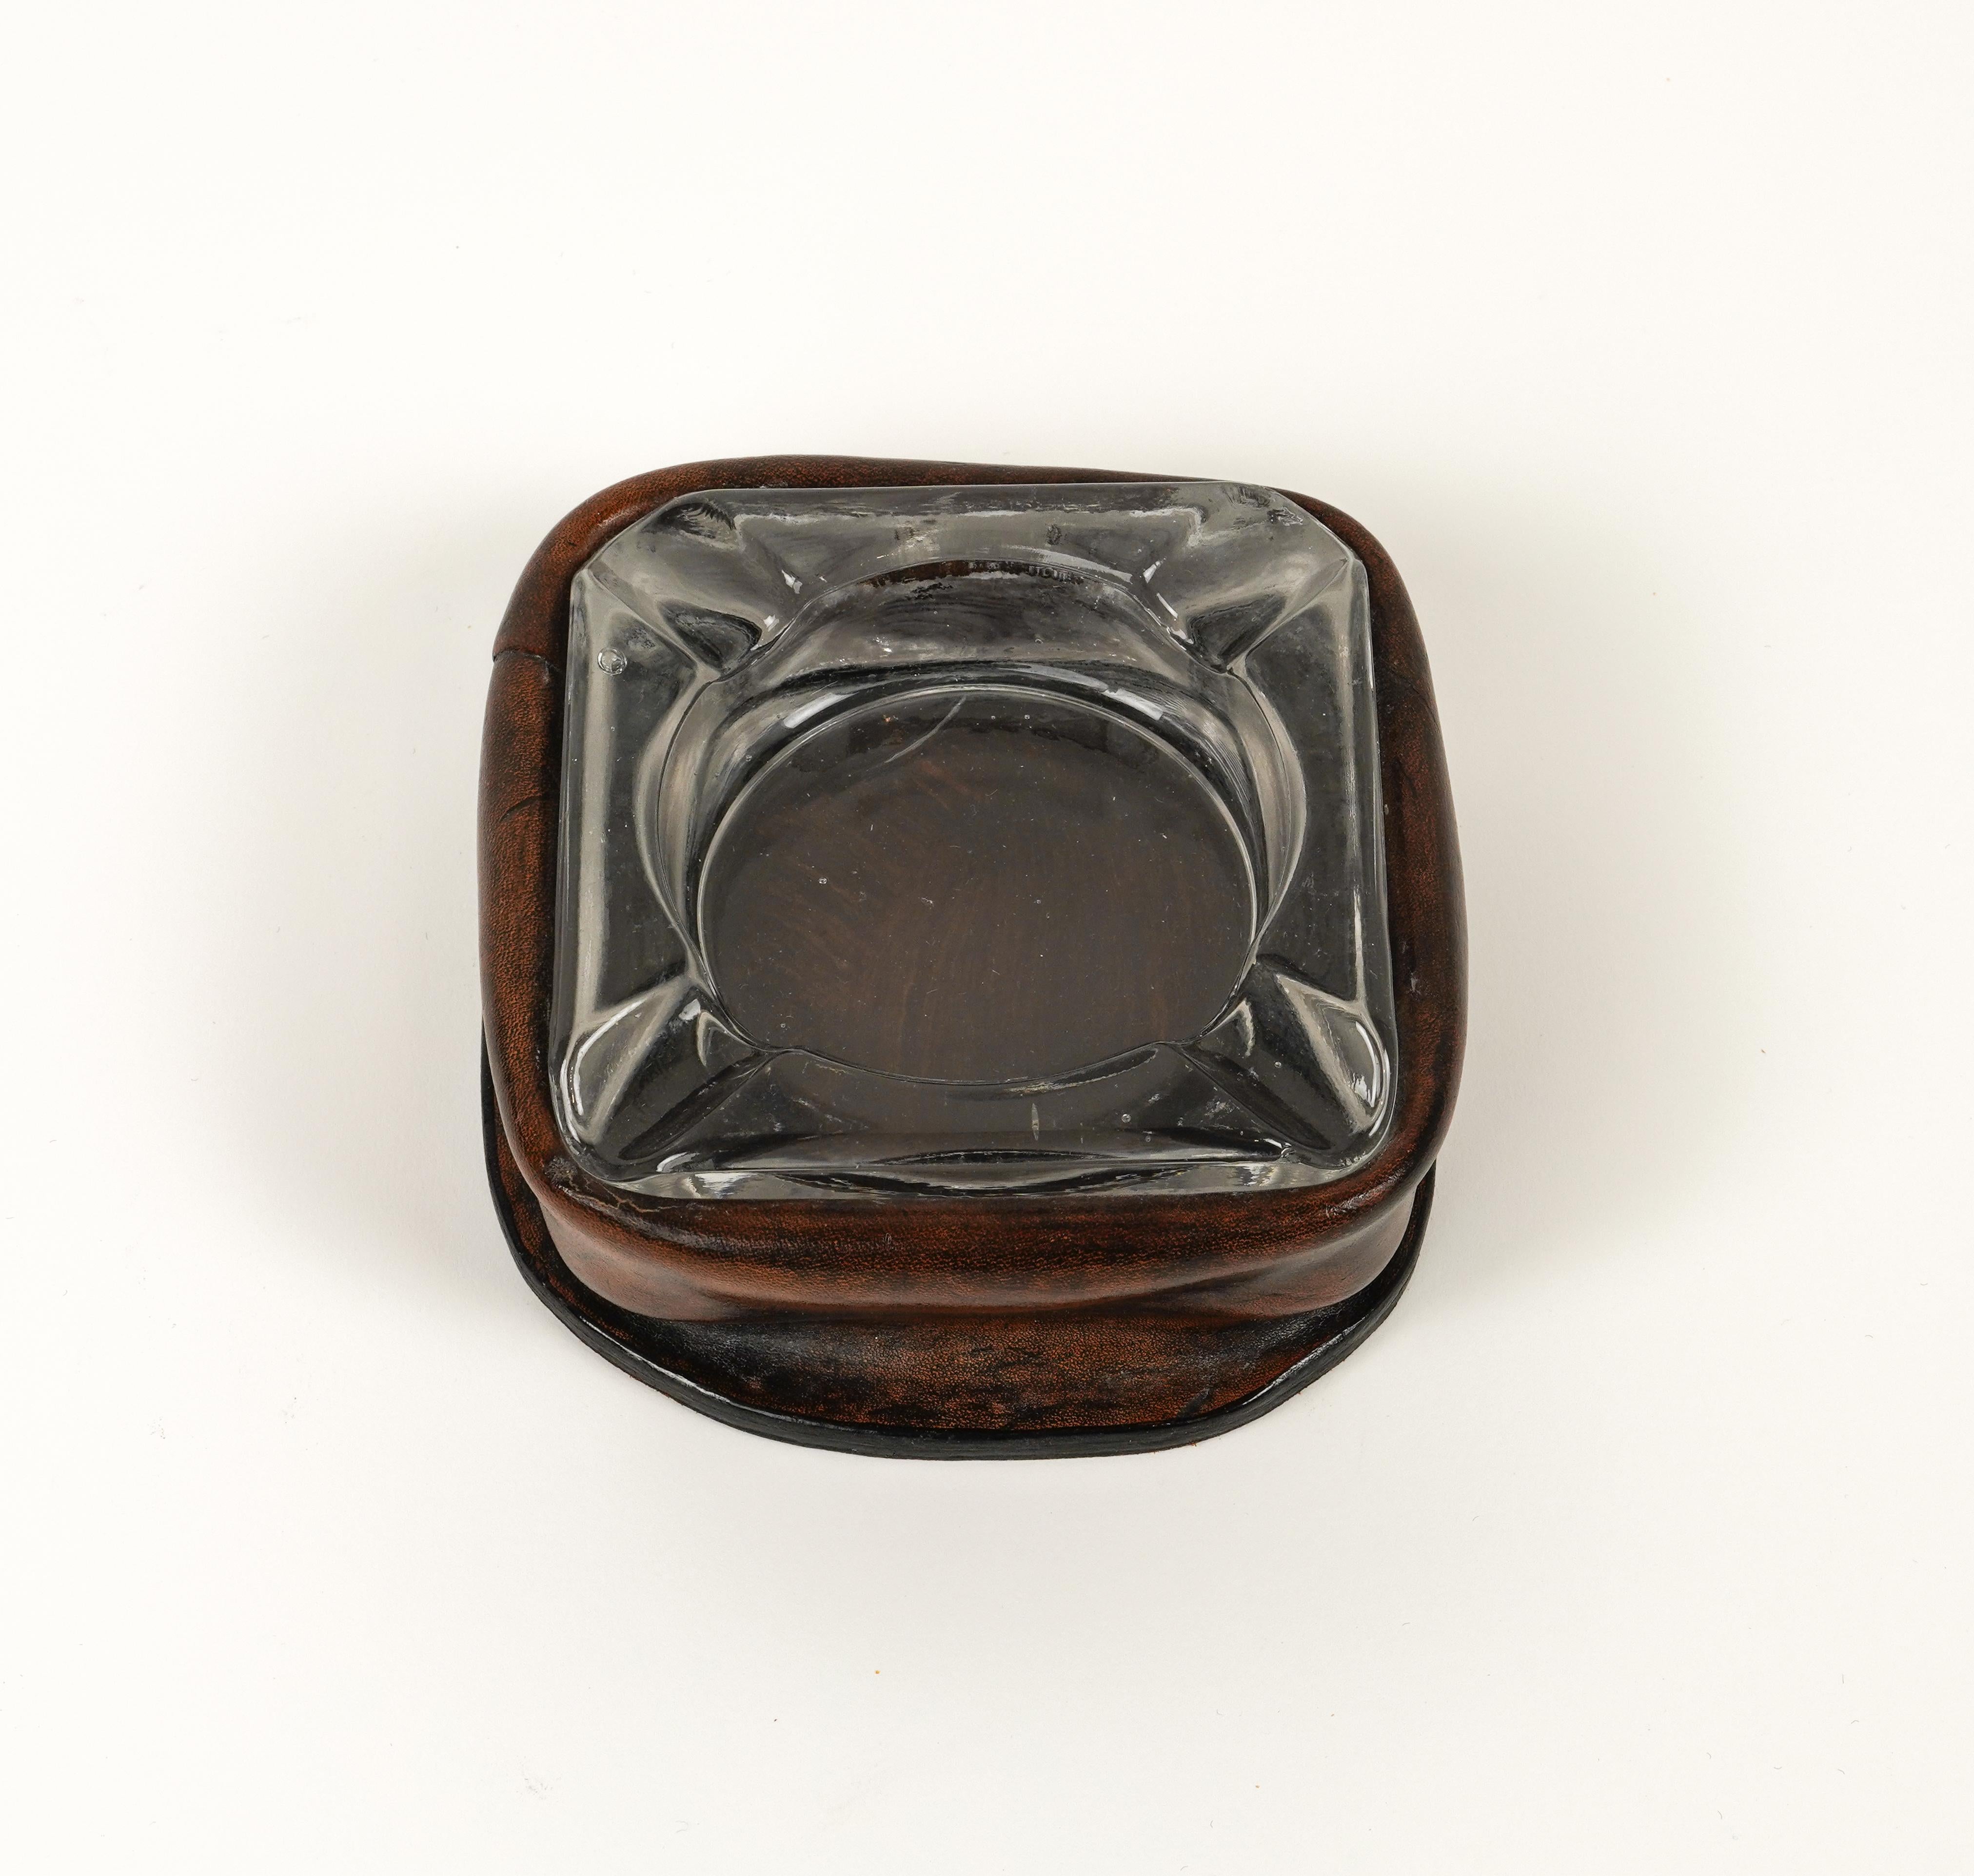 Mid-20th Century Midcentury Squared Ashtray in Leather and Glass Jacques Adnet Style, Italy 1970s For Sale